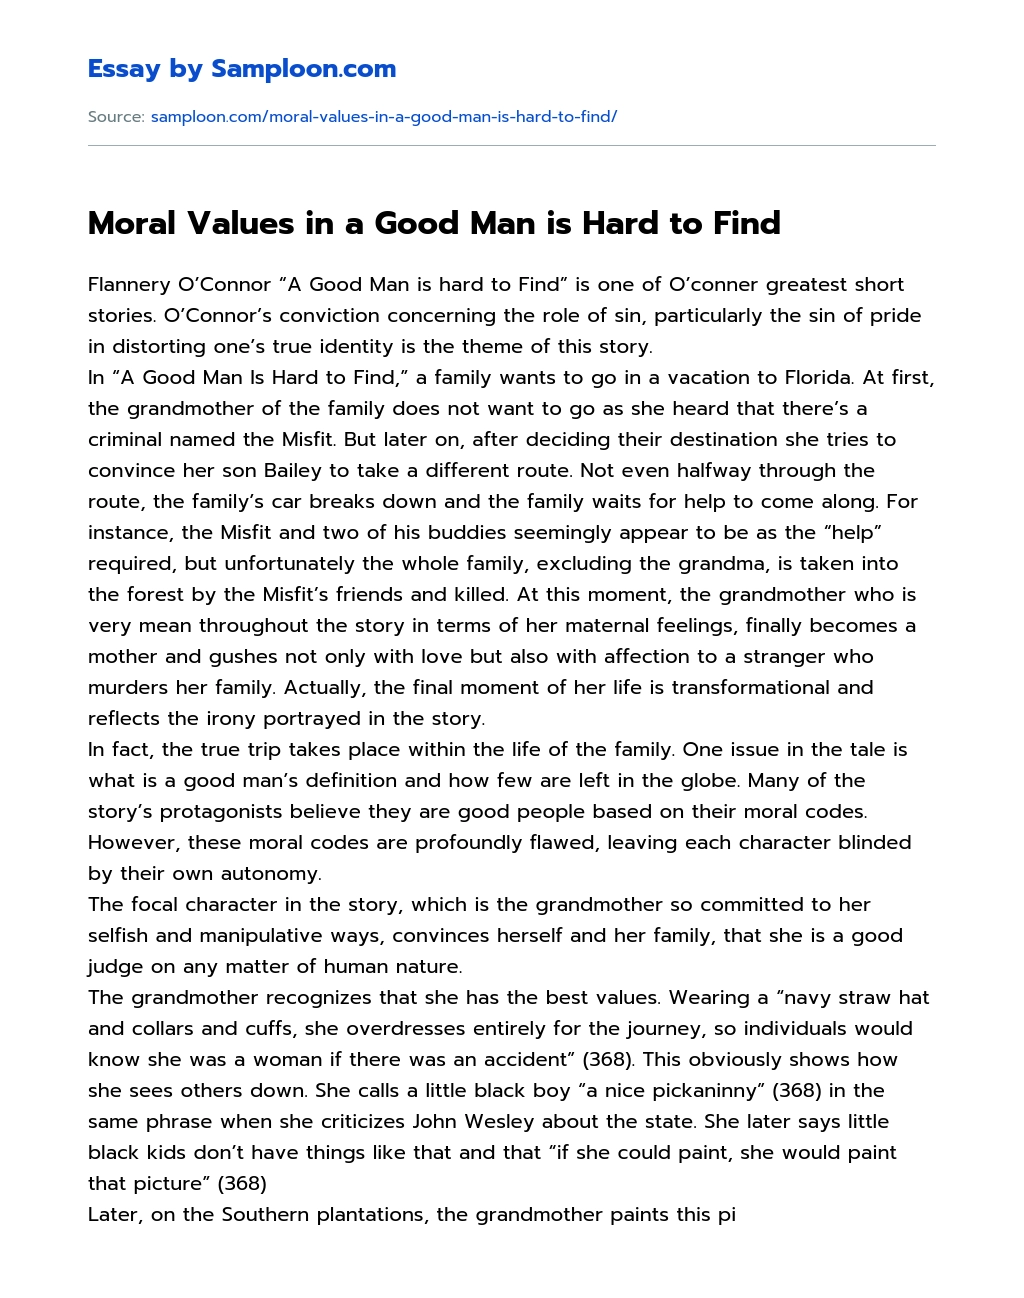 Moral Values in a Good Man is Hard to Find essay